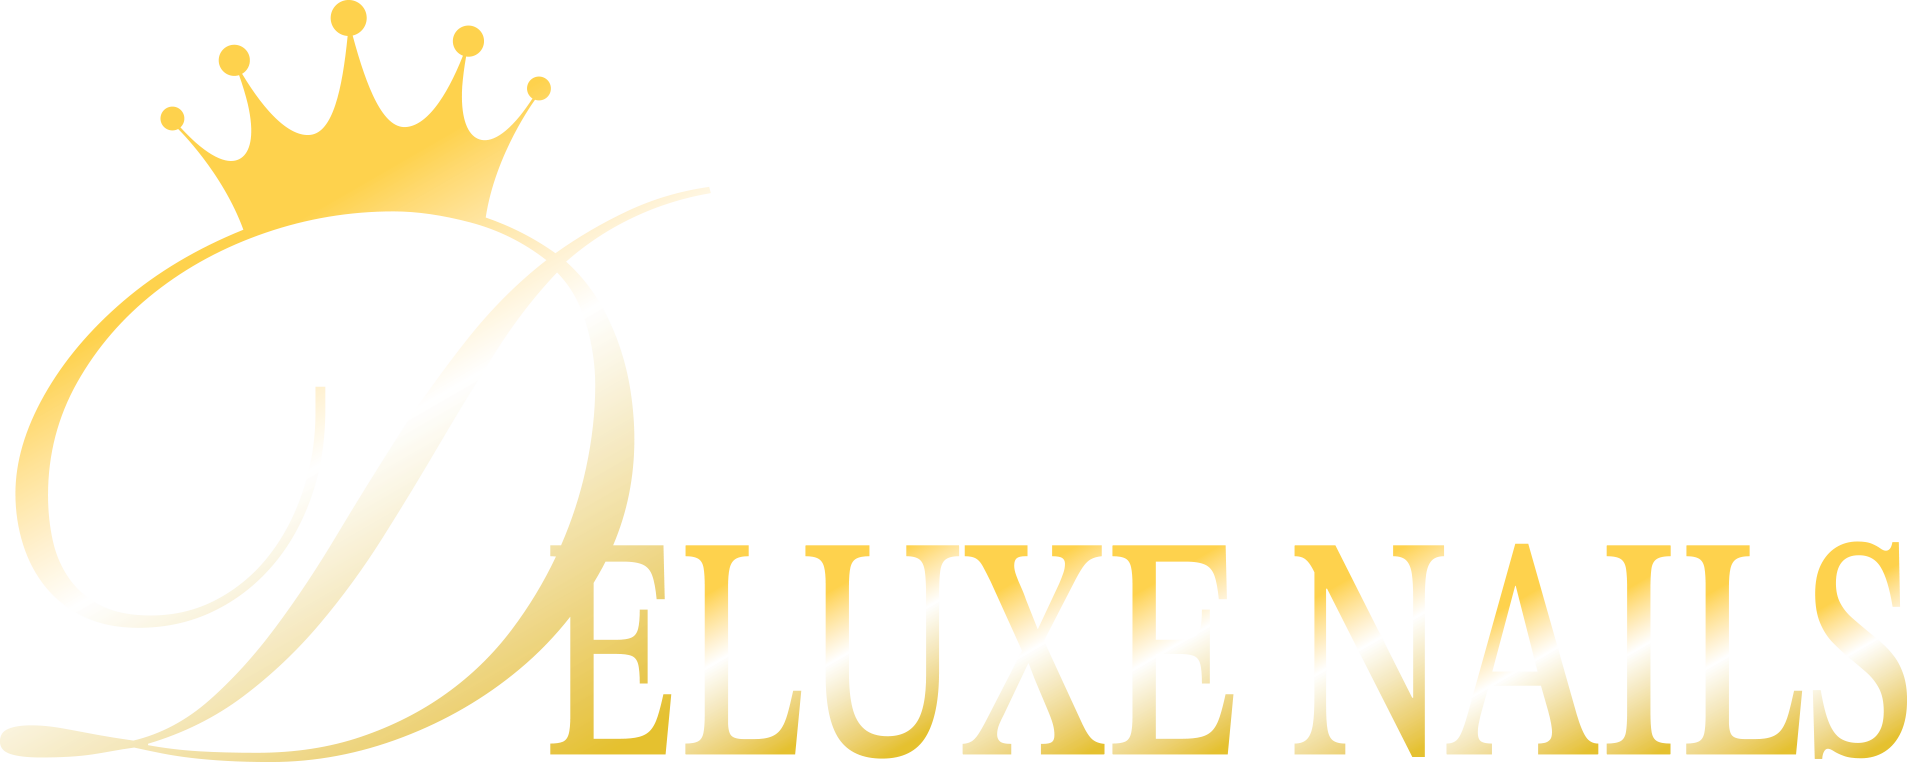 Deluxe Nails Exeter Logo